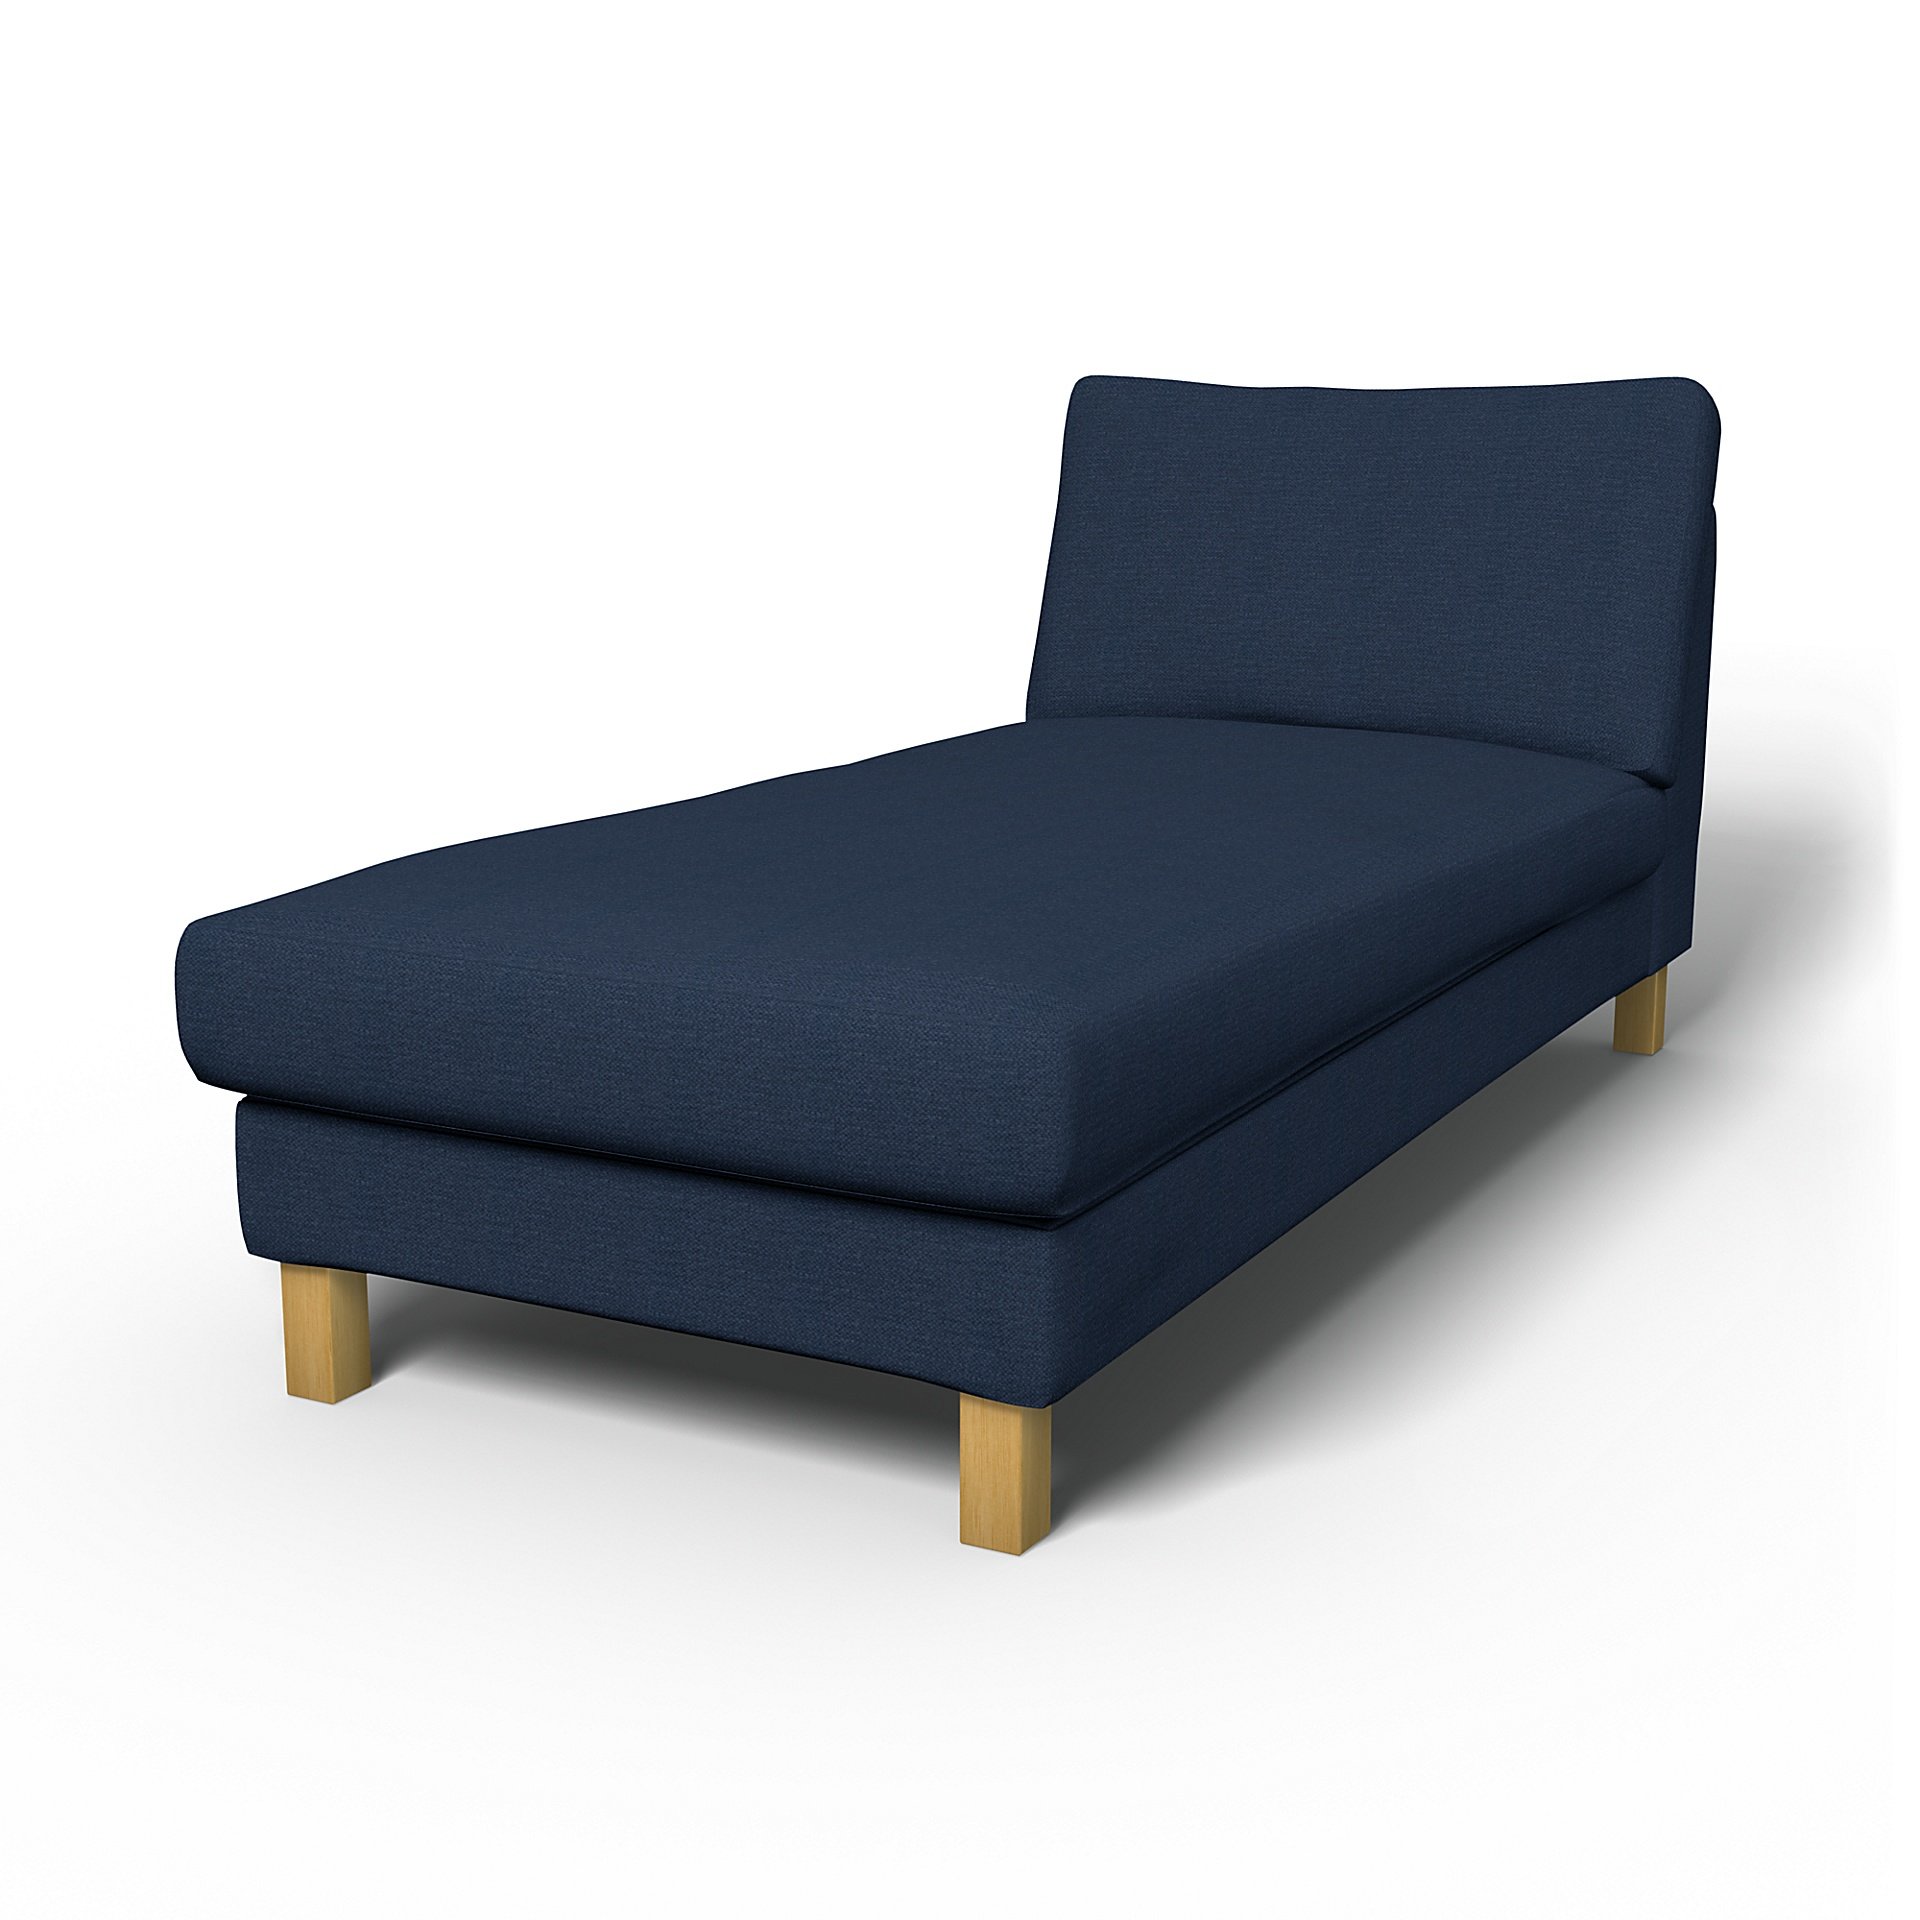 IKEA - Karlstad Stand Alone Chaise Longue Cover, Navy Blue, Linen - Bemz